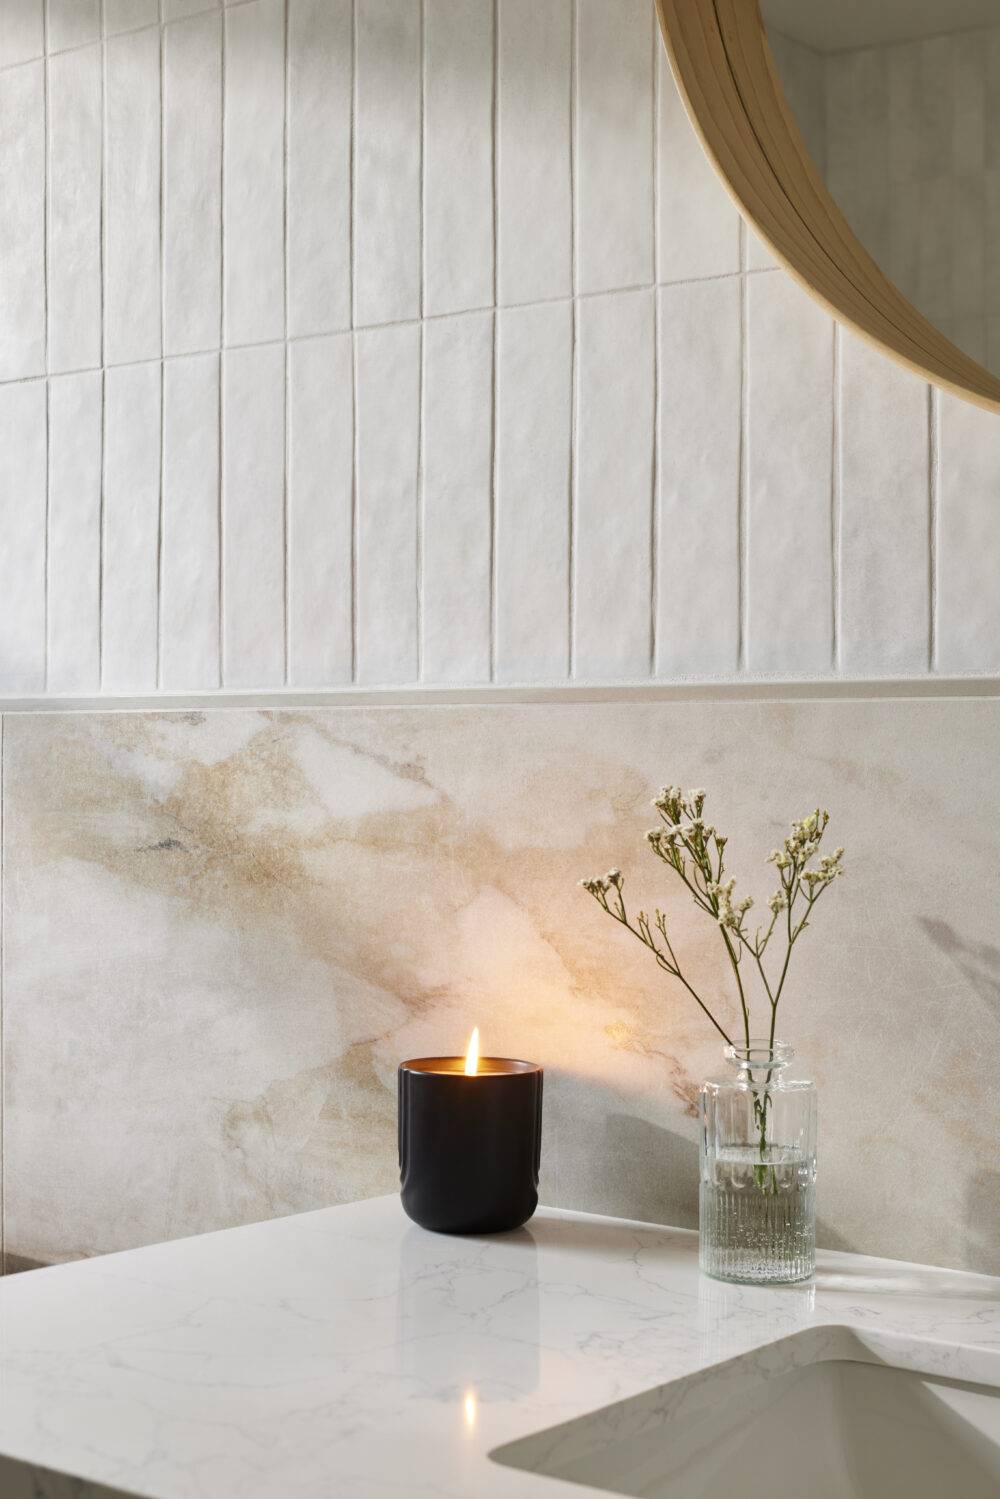 White wall with marble-look and handmade-look tile and sink with a candle and small plant.